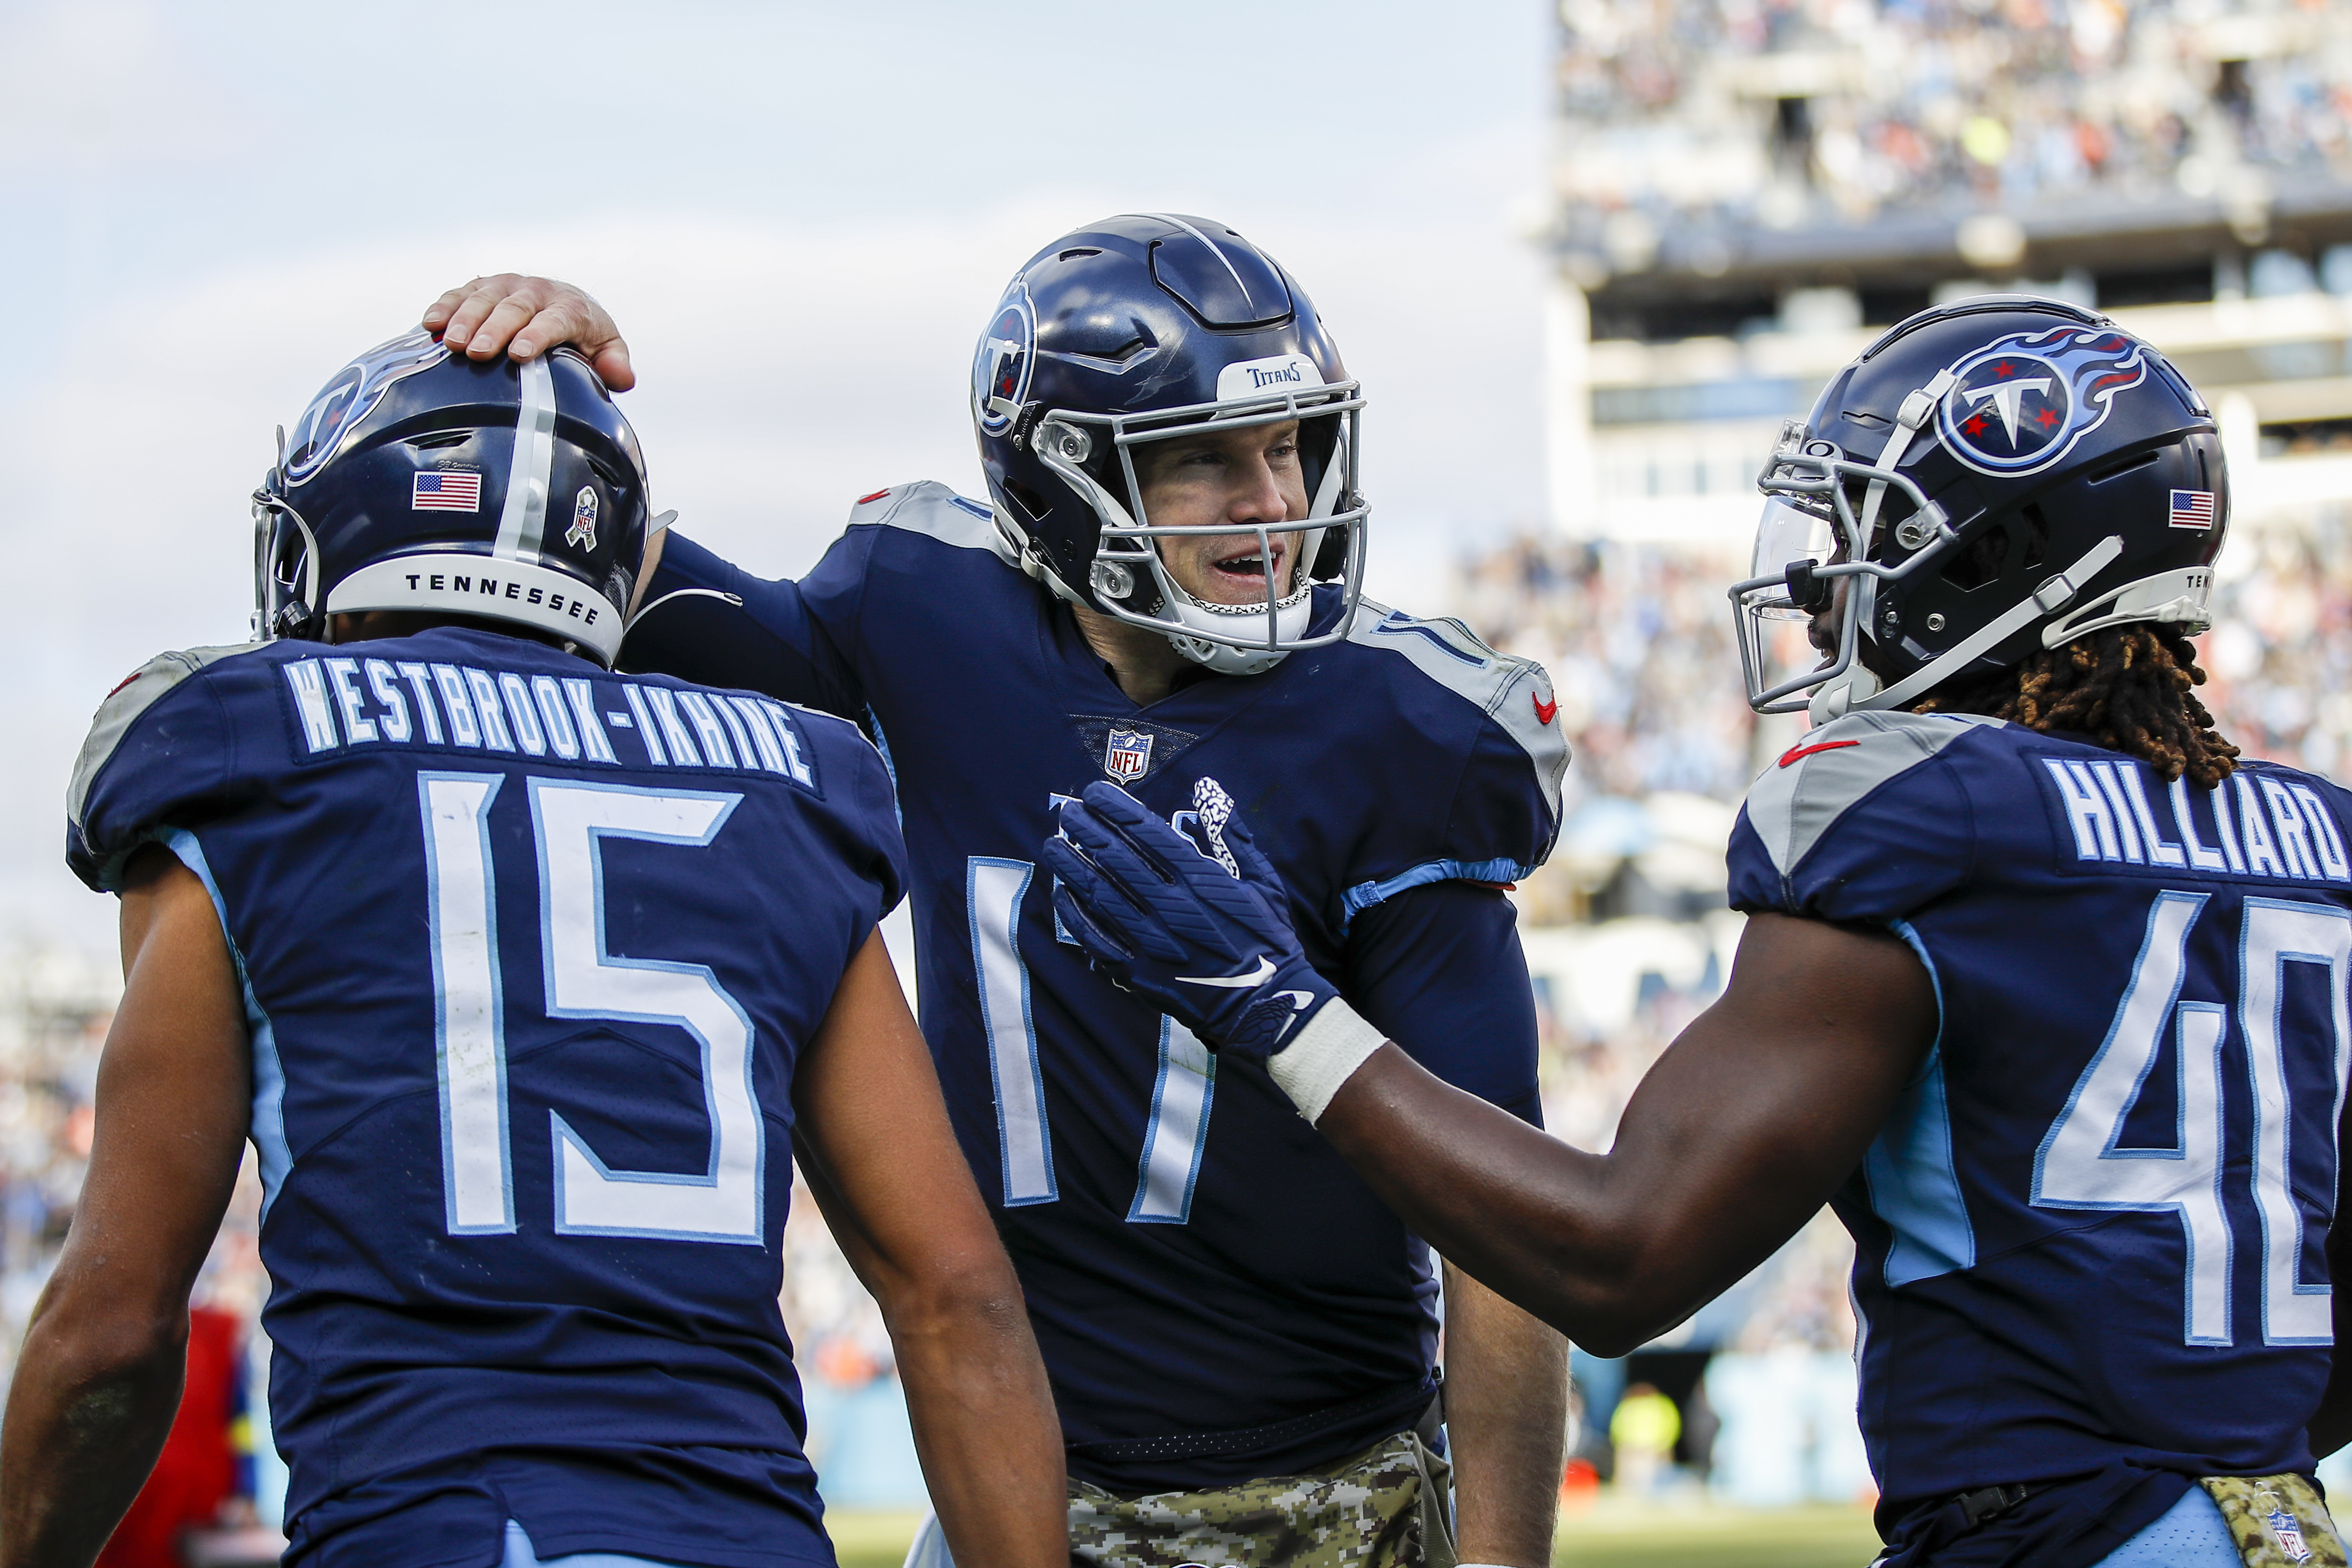 BetMGM's Top NFL Player Prop Picks for Titans-Packers TNF